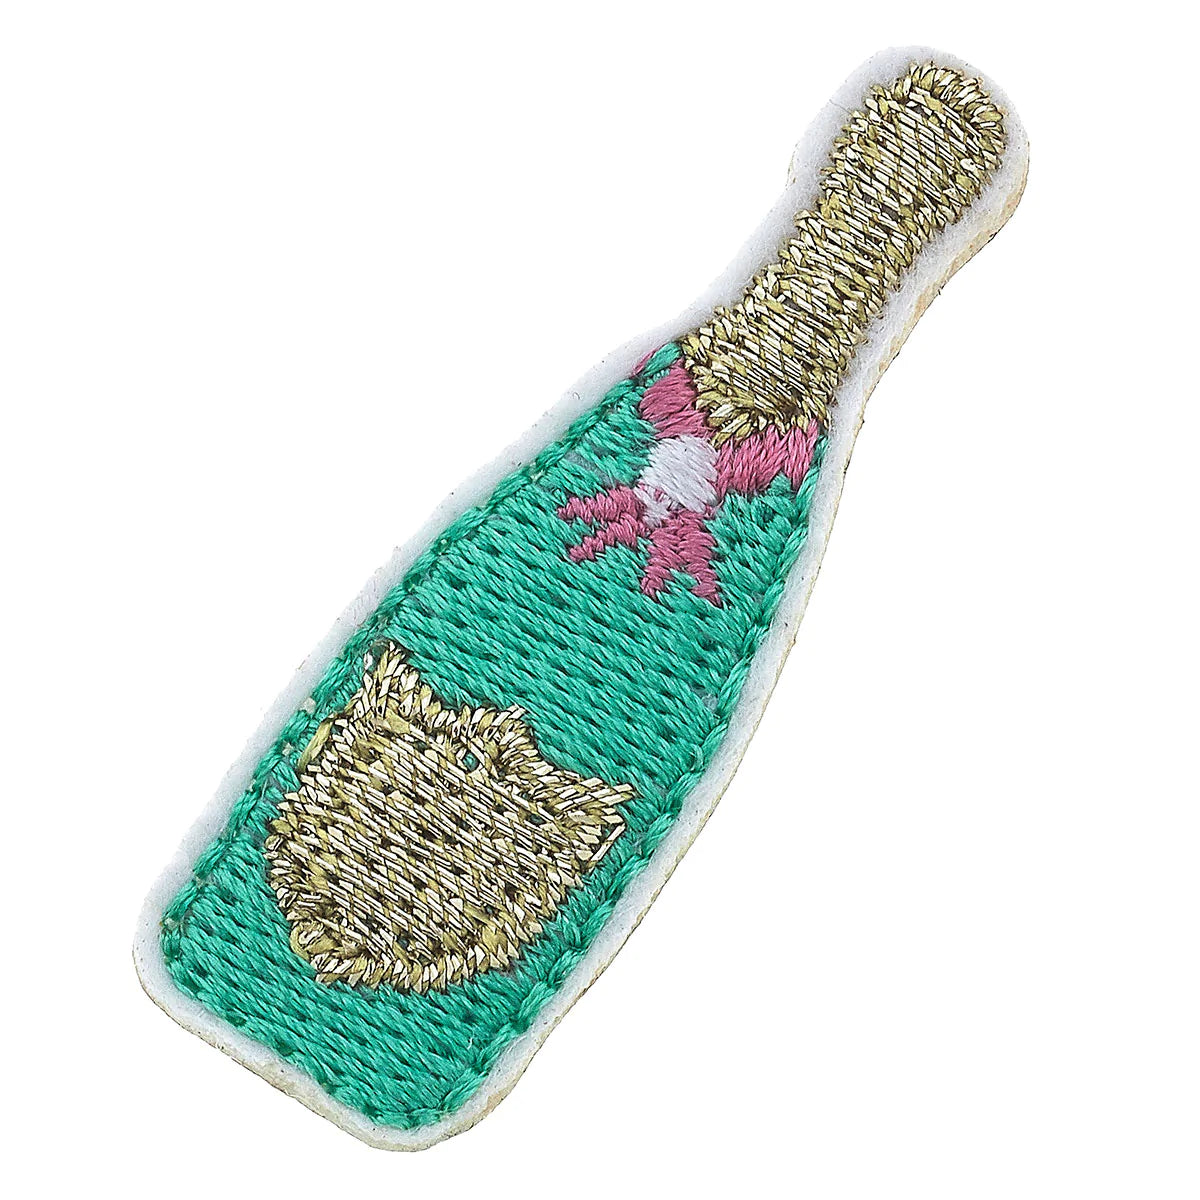 CHAMPAGNE BOTTLE PATCH SMALL